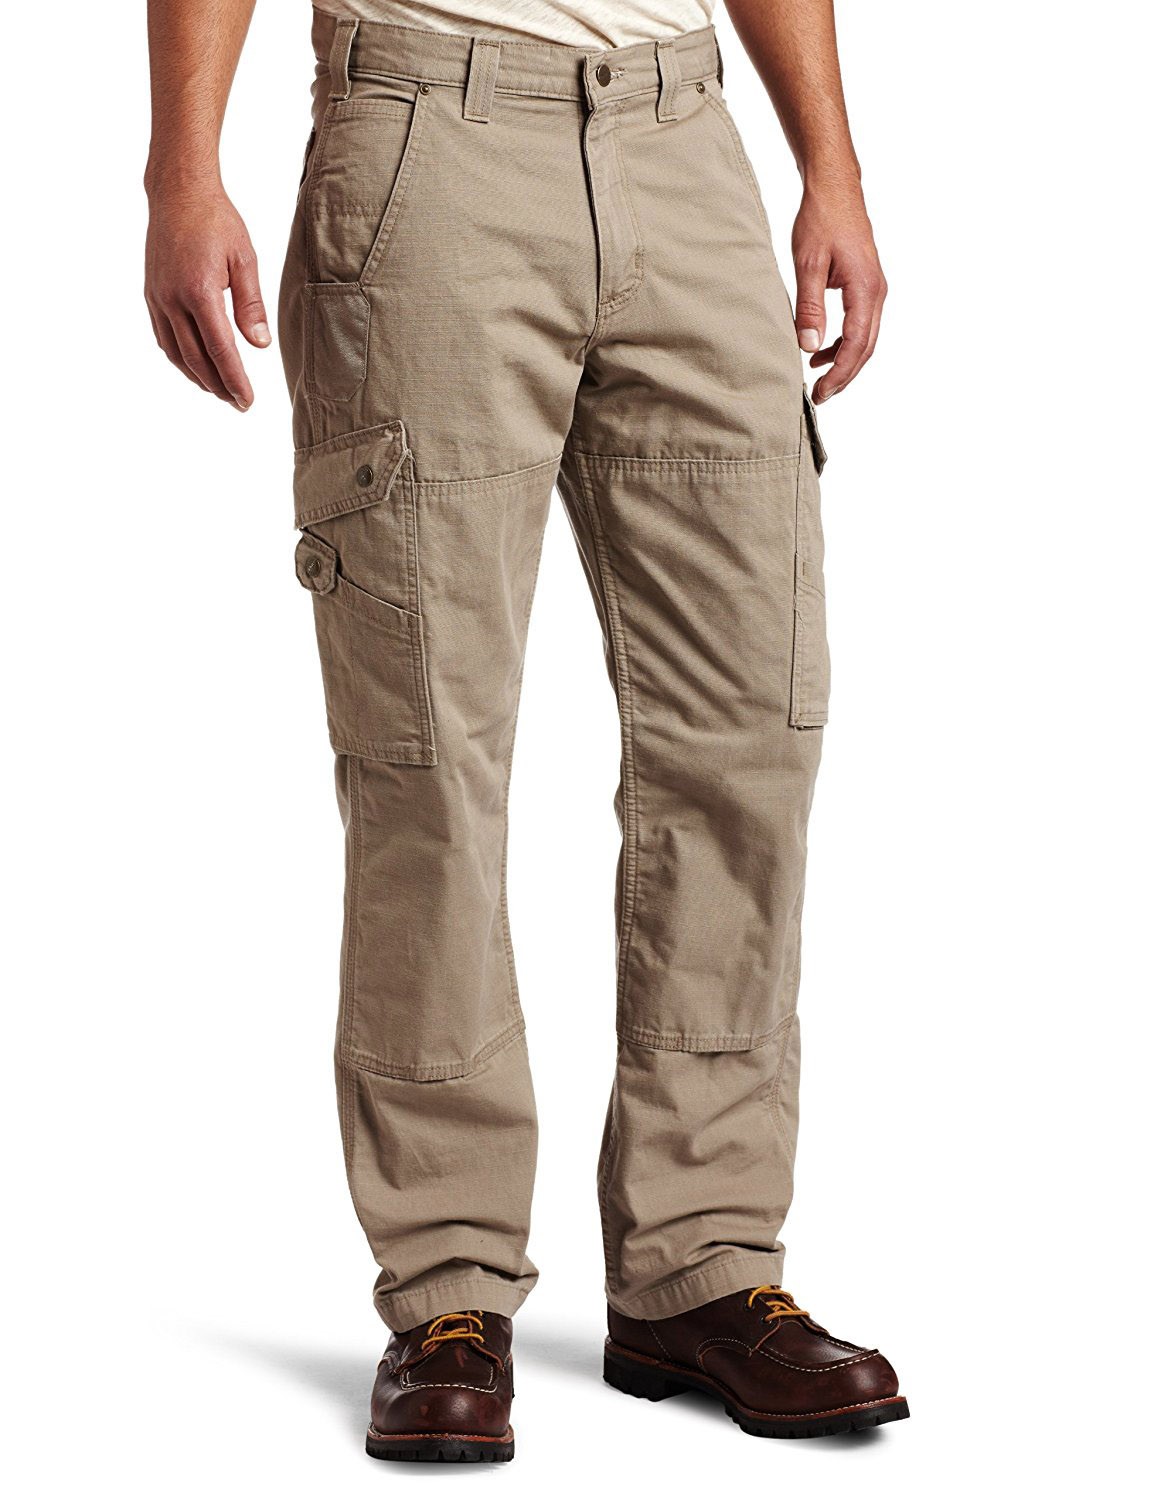 best cargo pants for work